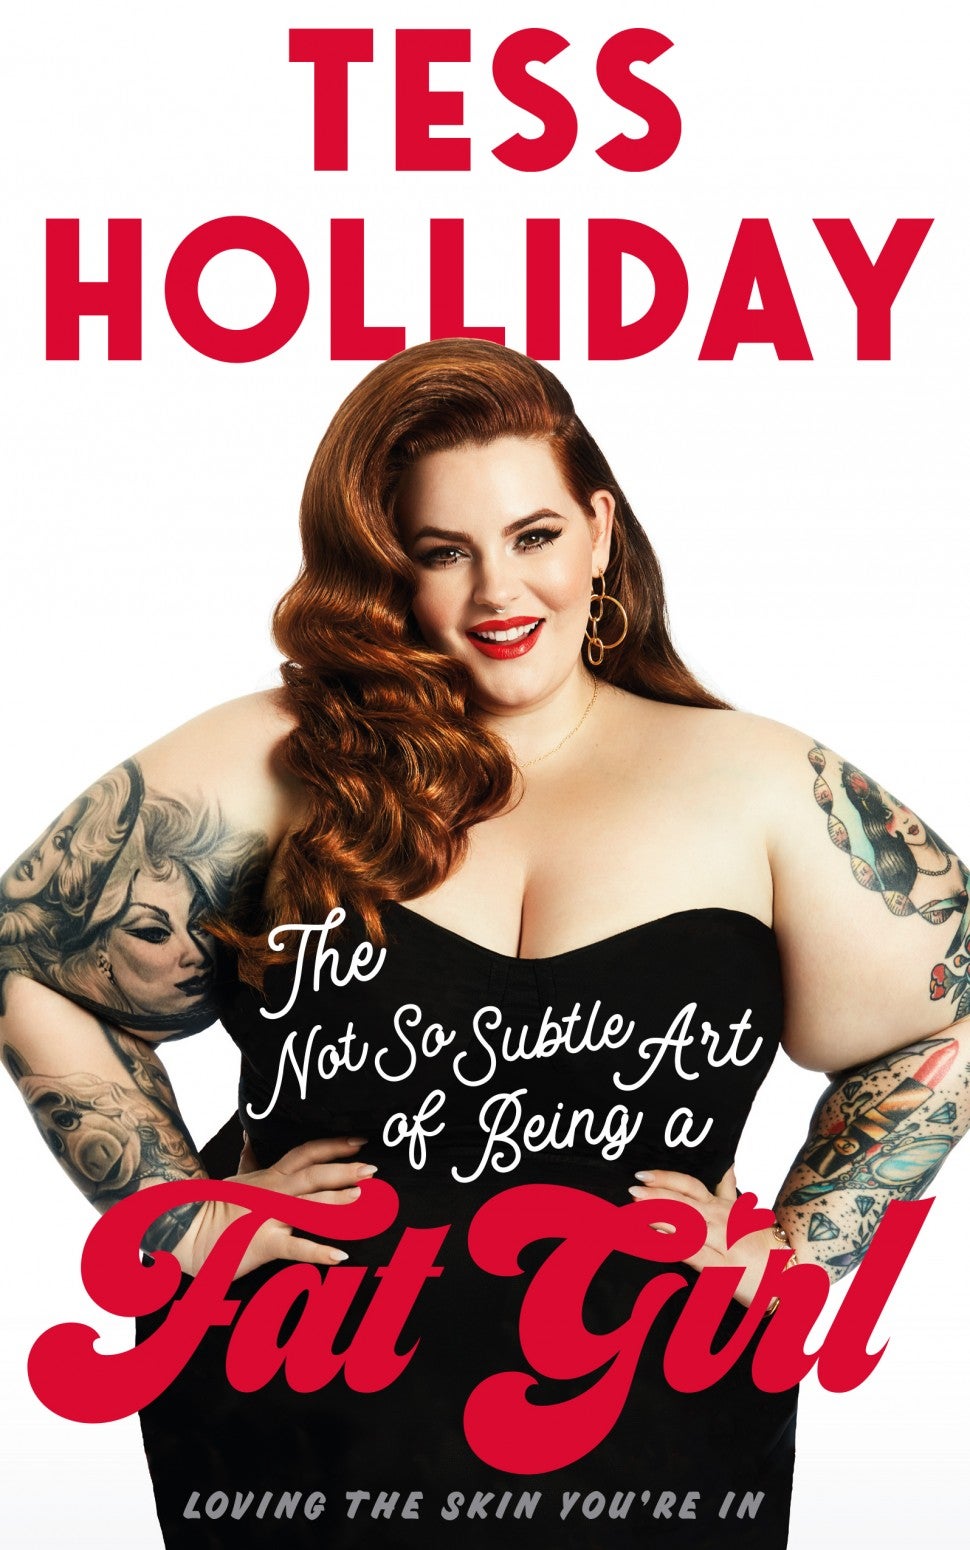 tess holiday book cover